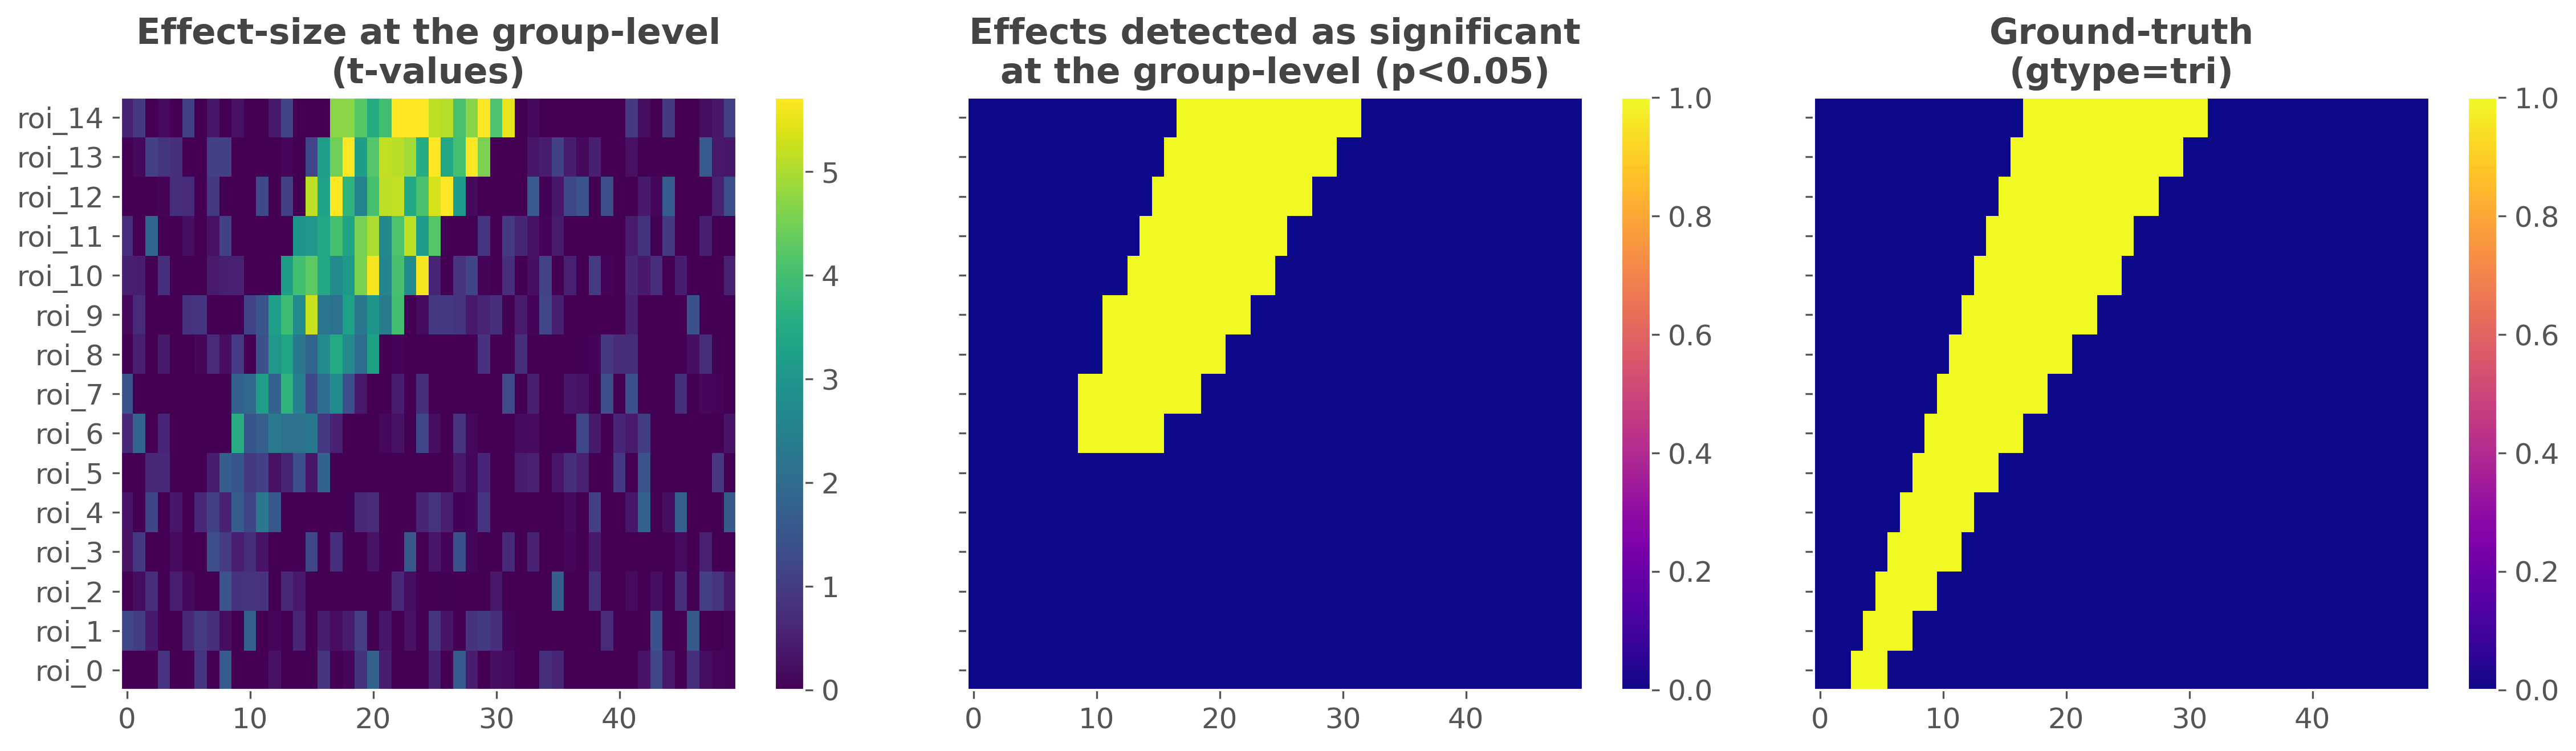 Effect-size at the group-level (t-values), Effects detected as significant at the group-level (p<0.05), Ground-truth (gtype=tri)